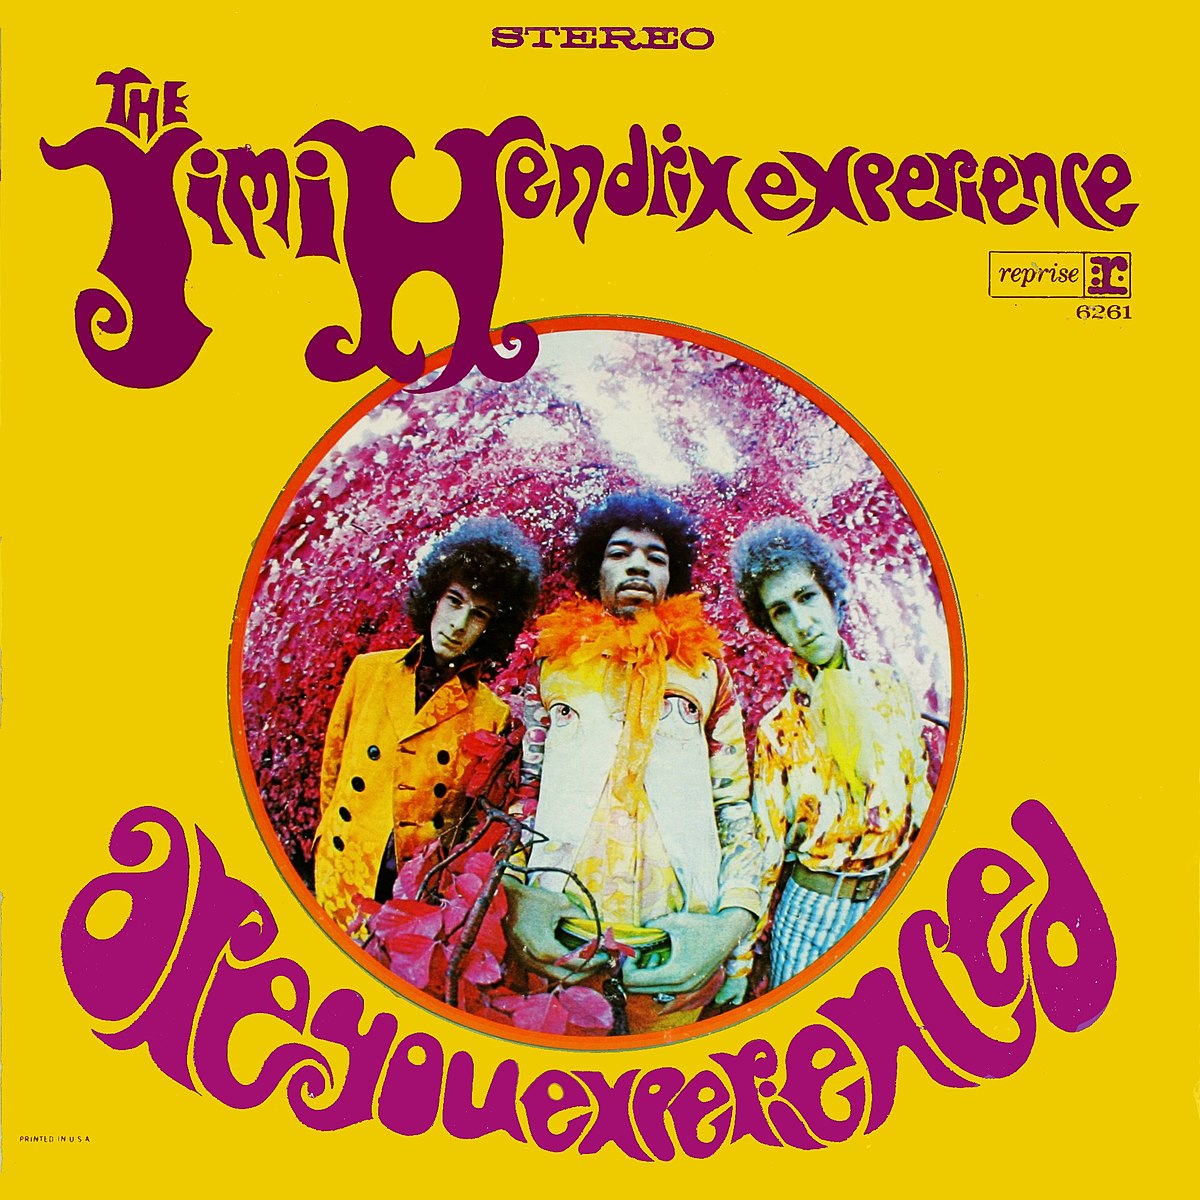 Are_You_Experienced_-_US_cover-edit.jpg